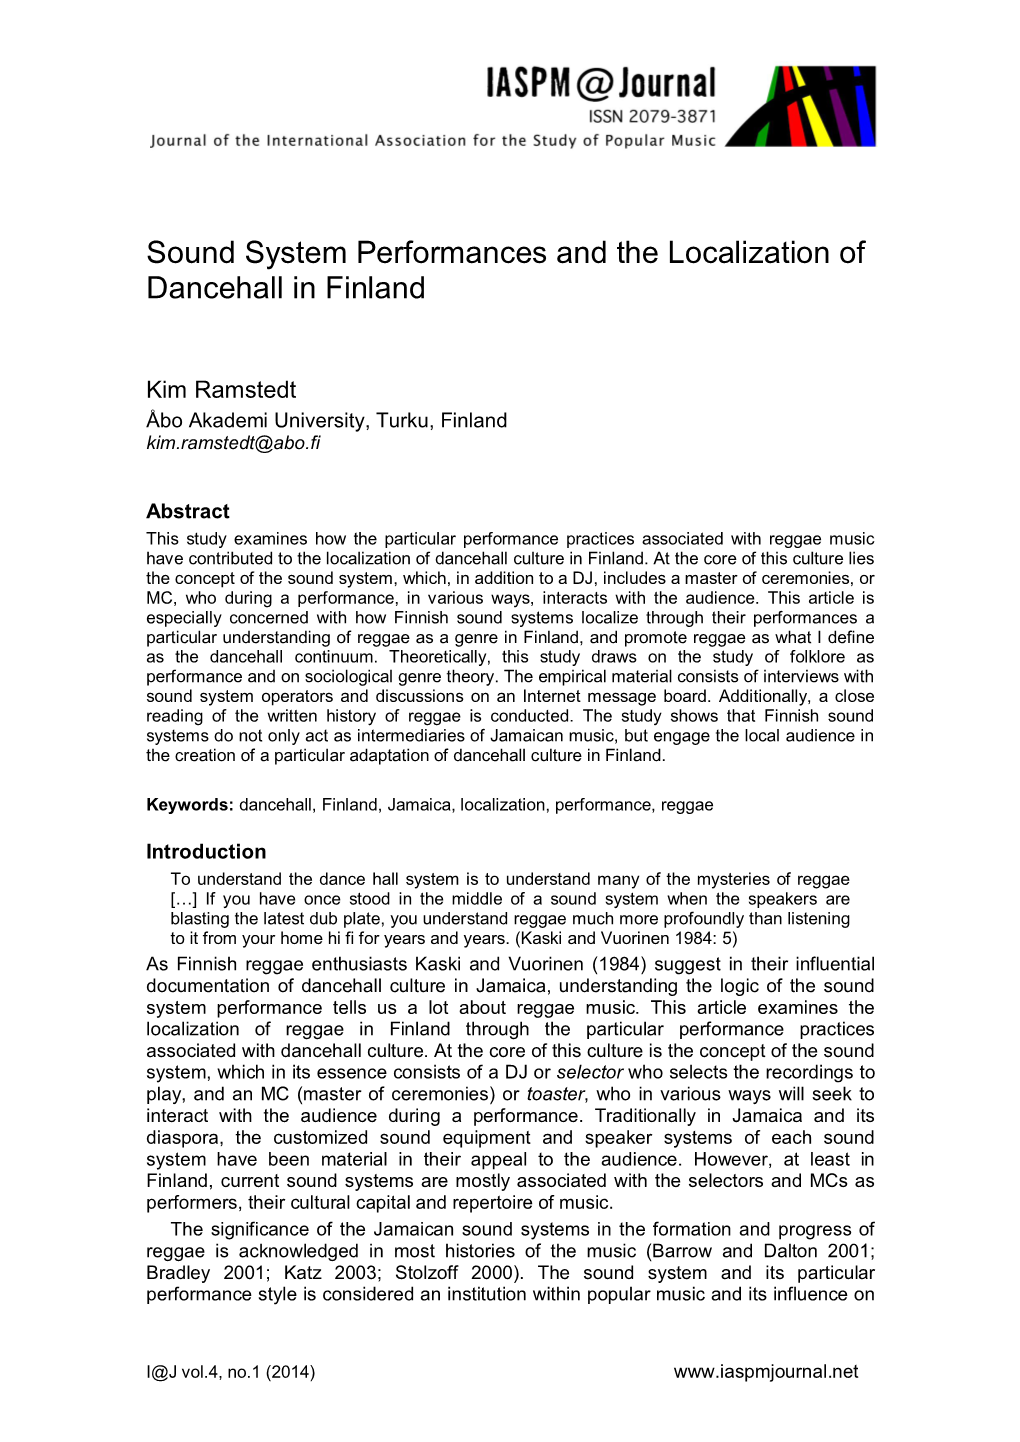 Sound System Performances and the Localization of Dancehall in Finland